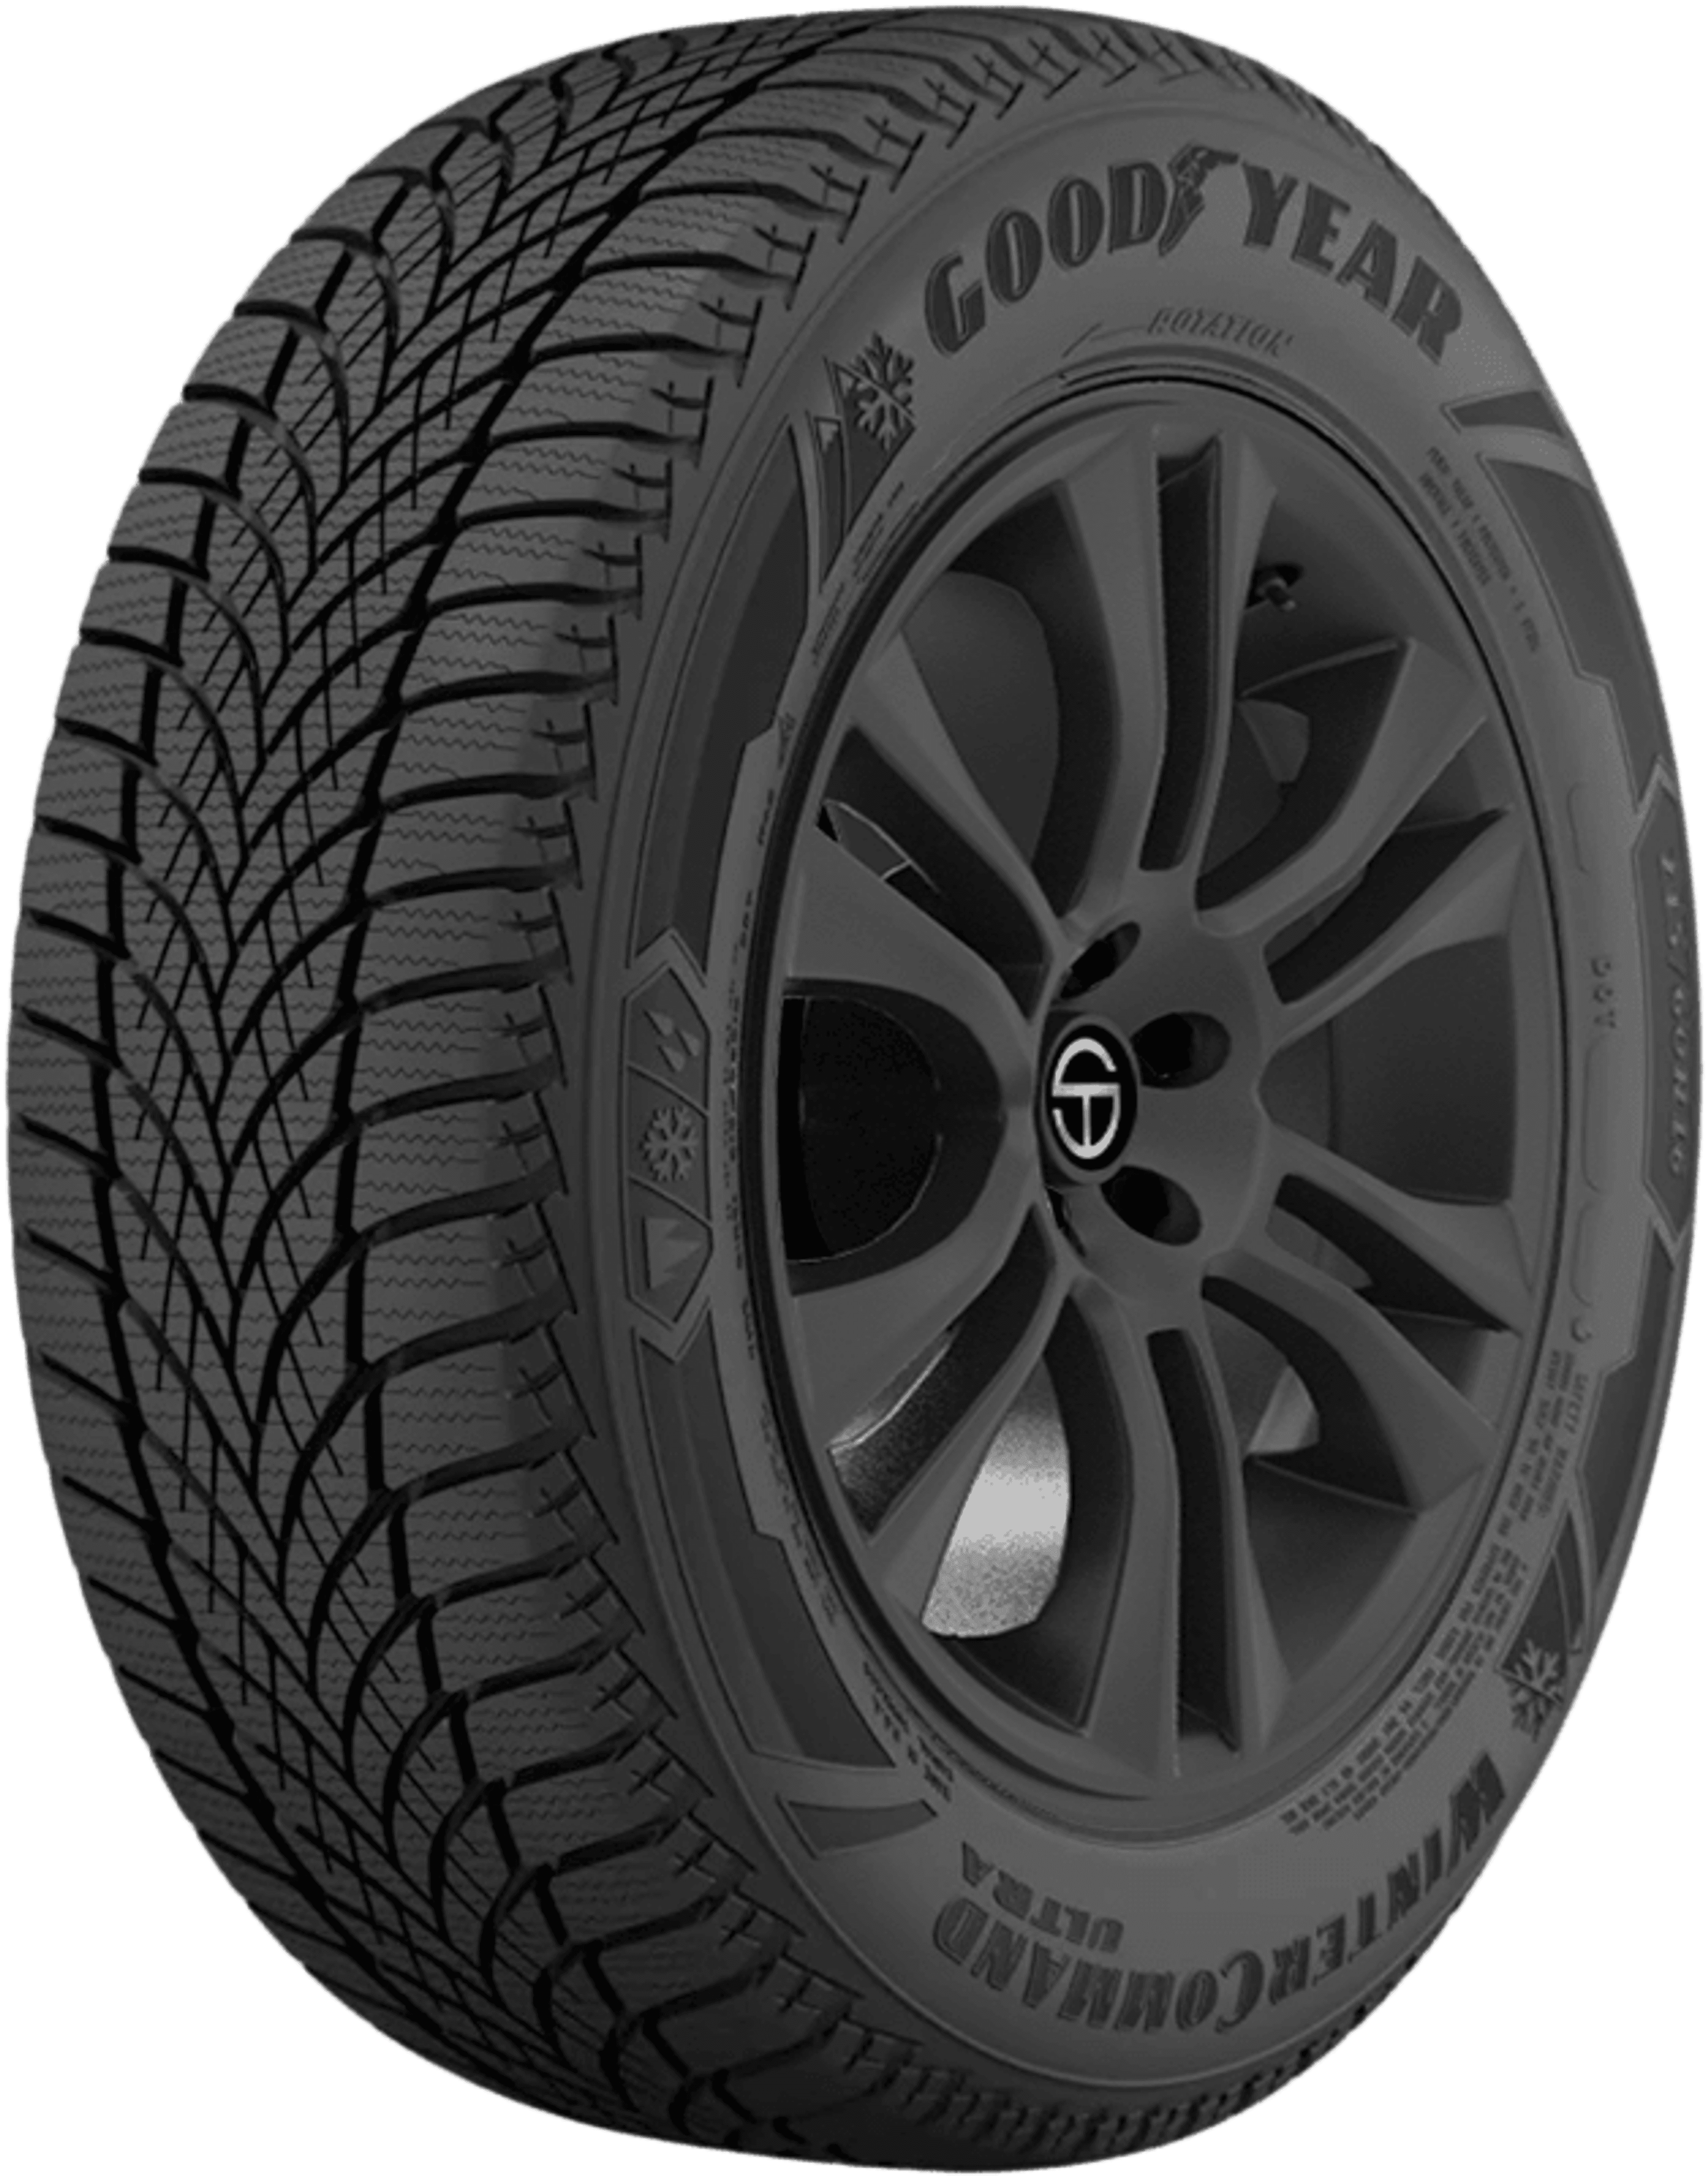 Buy Goodyear Winter Command Ultra Online | SimpleTire Tires